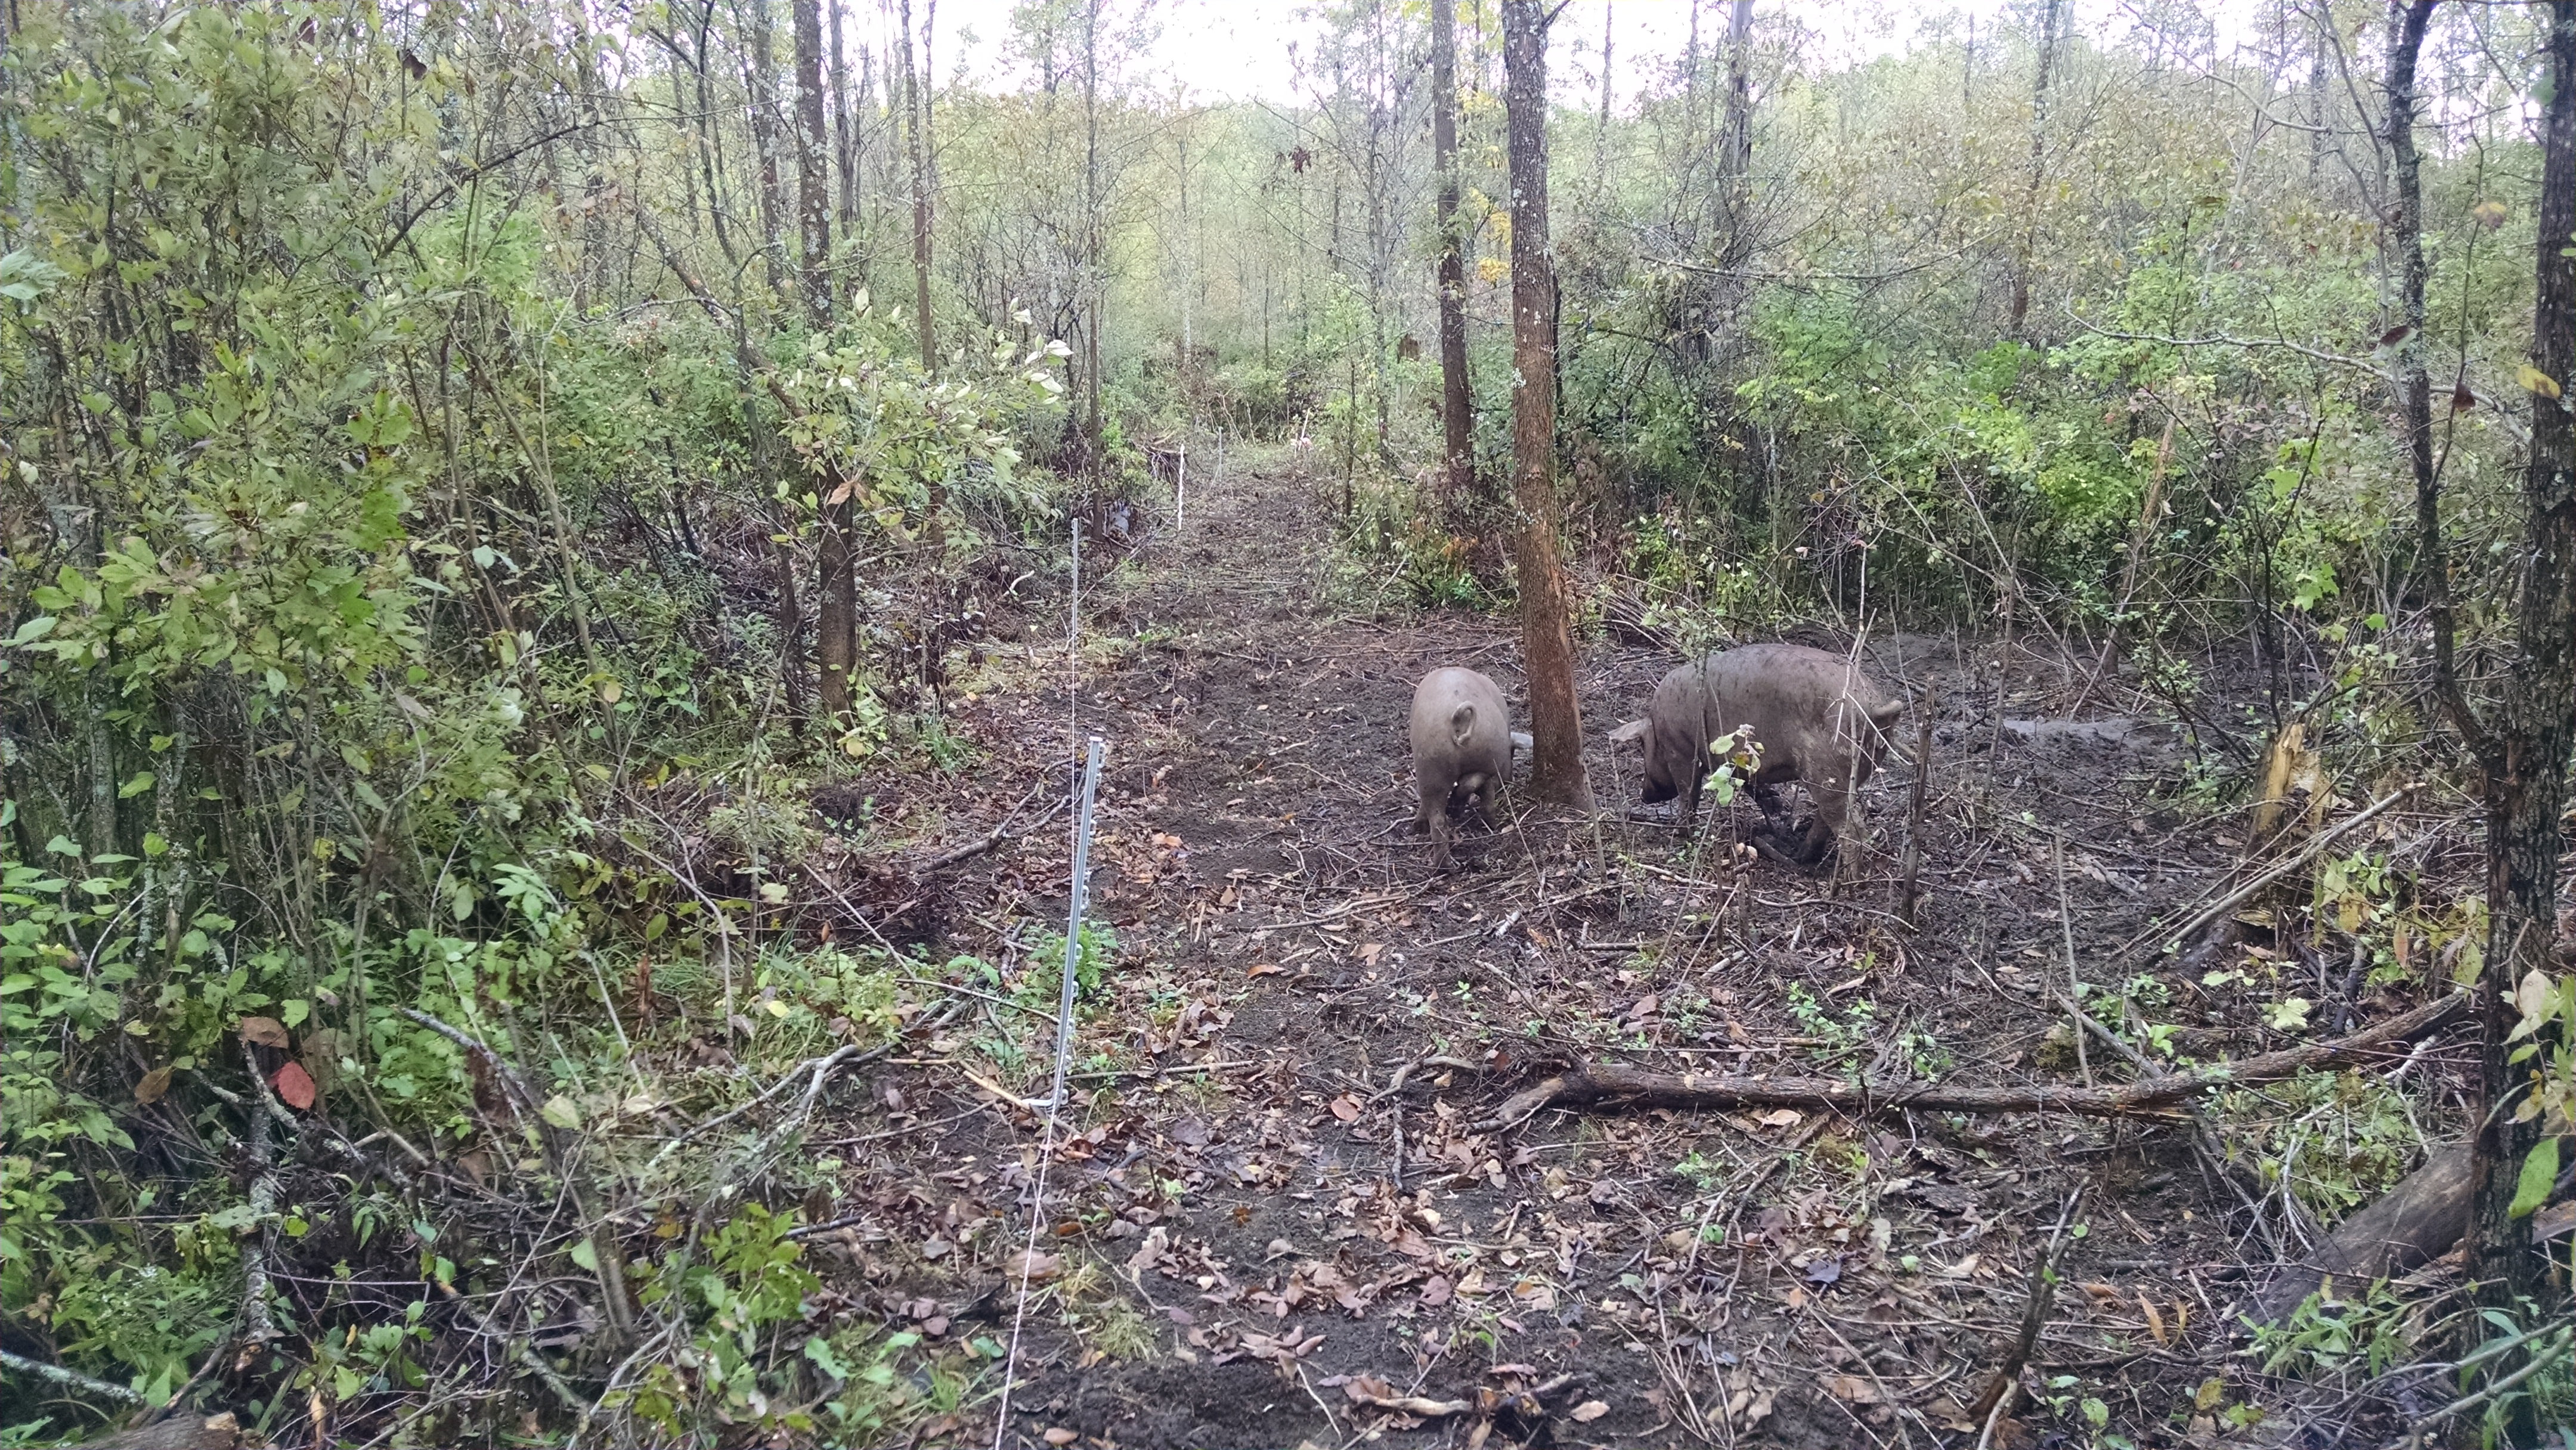 Walking the pigs' fenceline to make sure everything is secure.  The two gilts are taking a walk with me, perhaps to spy on my activities in planning their next breakout.